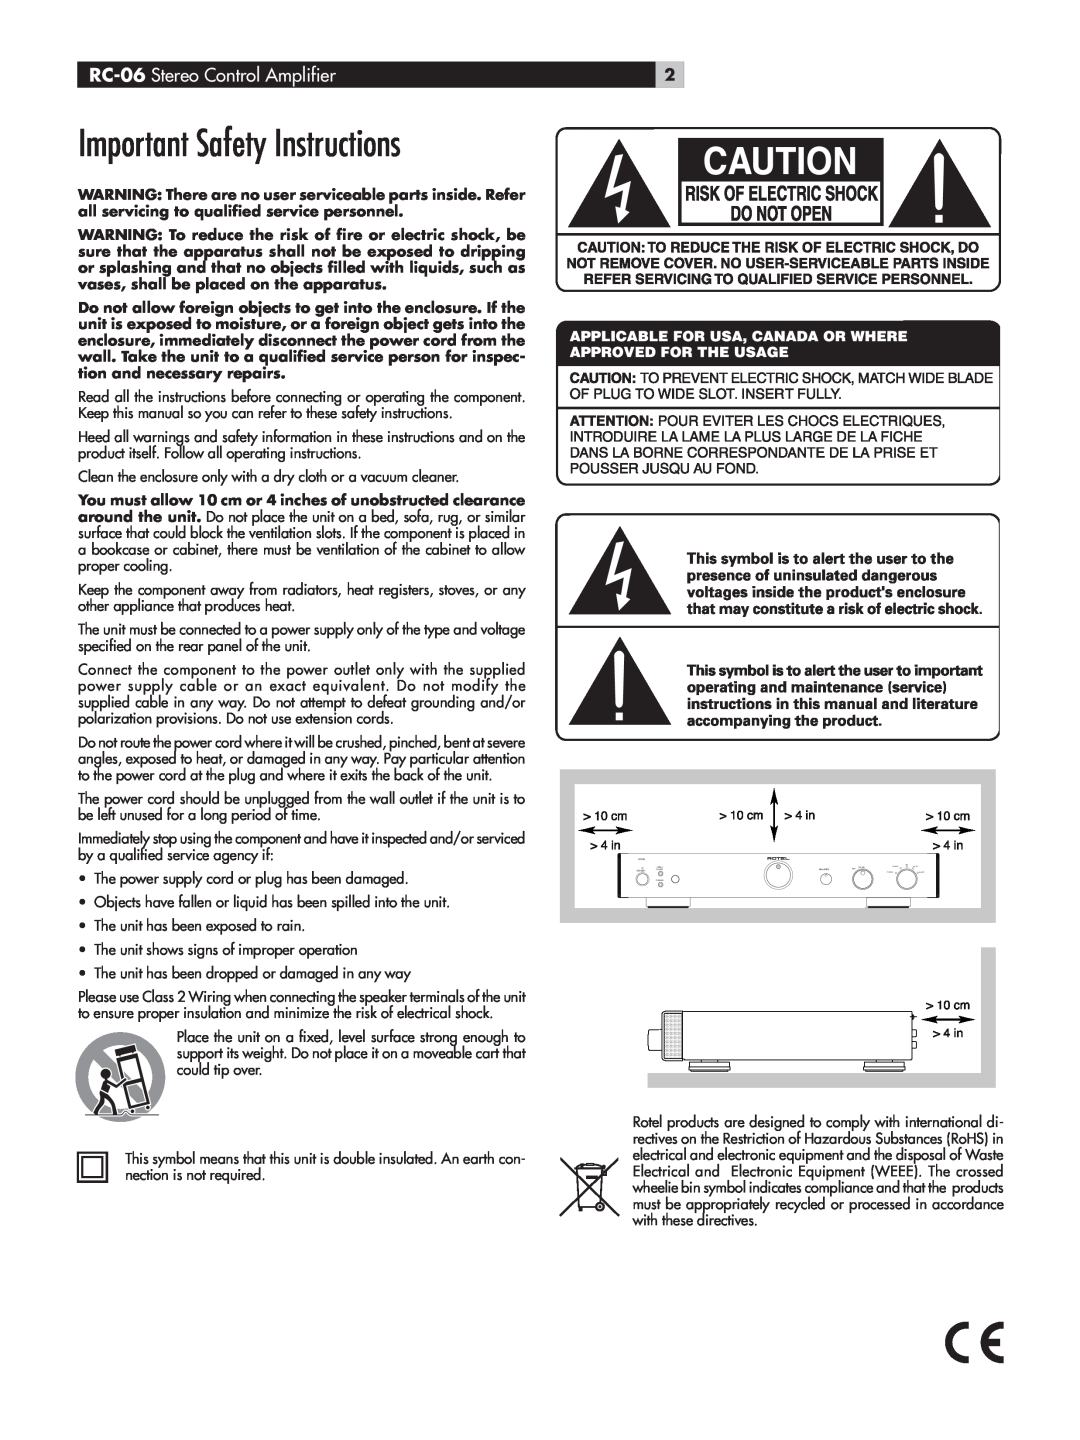 Rotel owner manual Important Safety Instructions, RC-06 Stereo Control Amplifier 